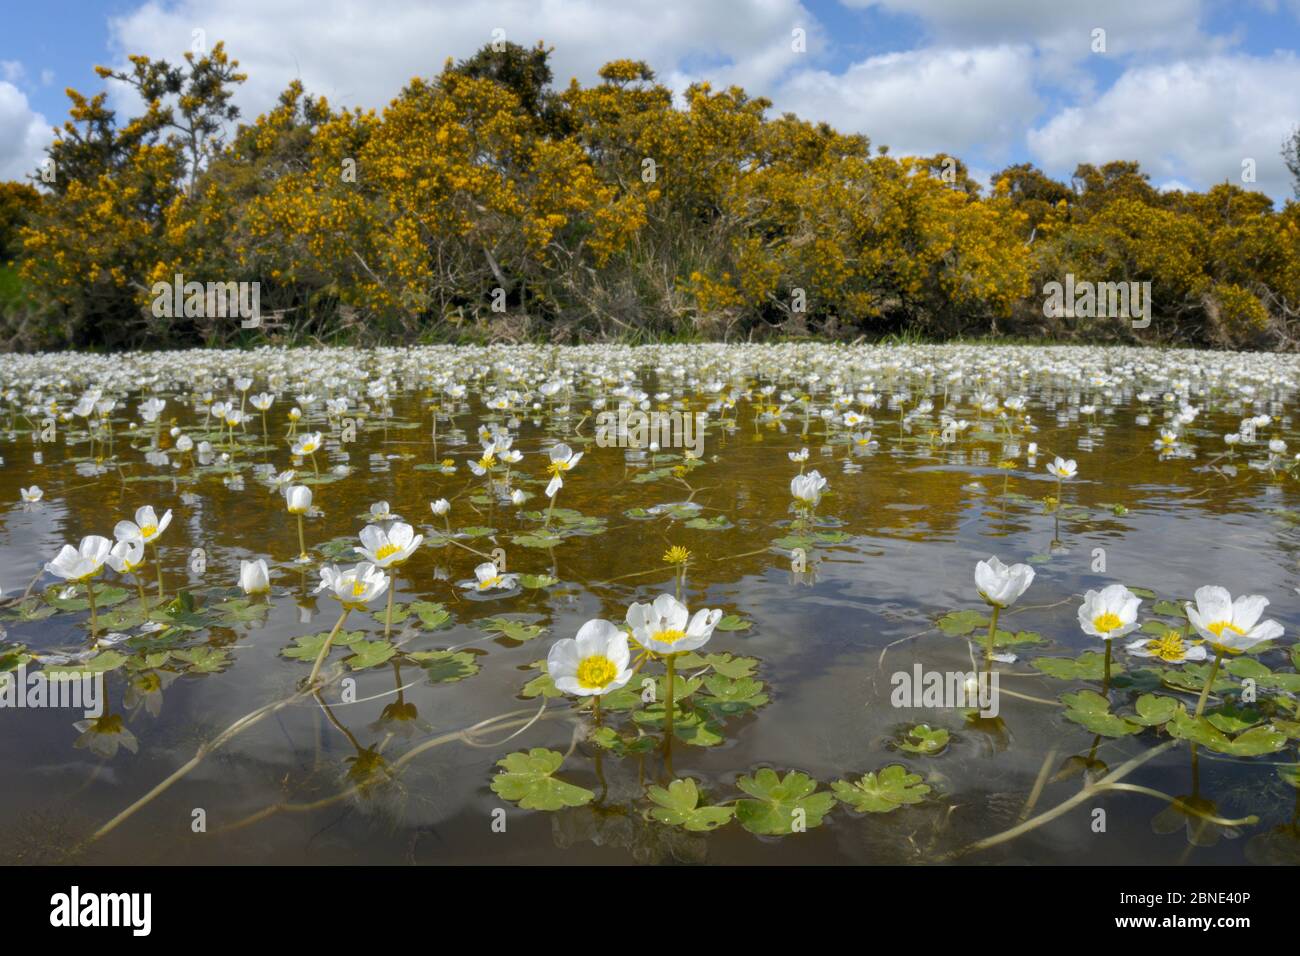 Fisheye lens view of Common water-crowfoot (Ranunculus aquatilis) flowering in a pond fringed by Common gorse bushes (Ulex europaeus), Brecon Beacons Stock Photo